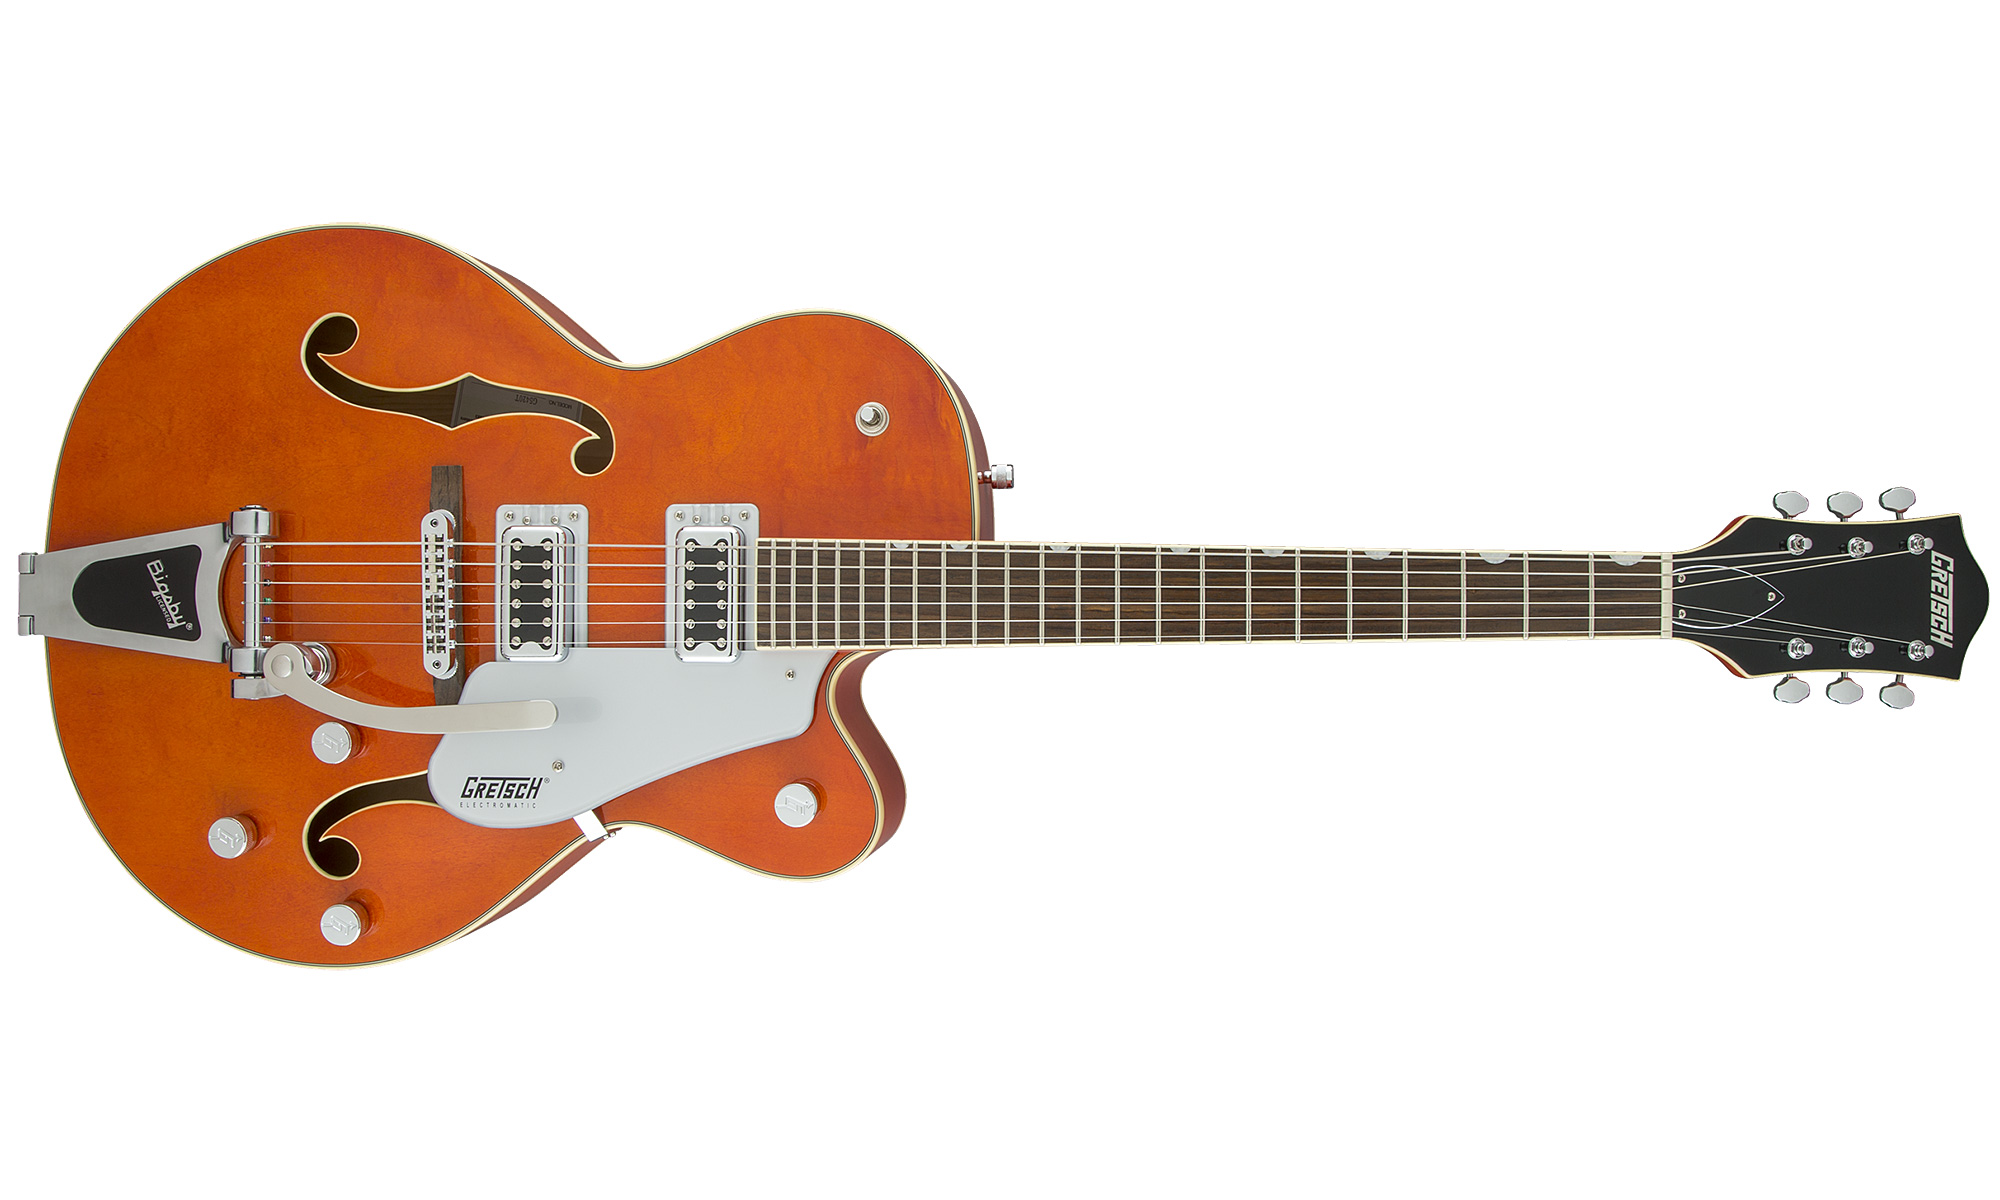 Gretsch G5420t Electromatic Hollow Body 2016 - Orange Stain - Hollow-body electric guitar - Variation 1